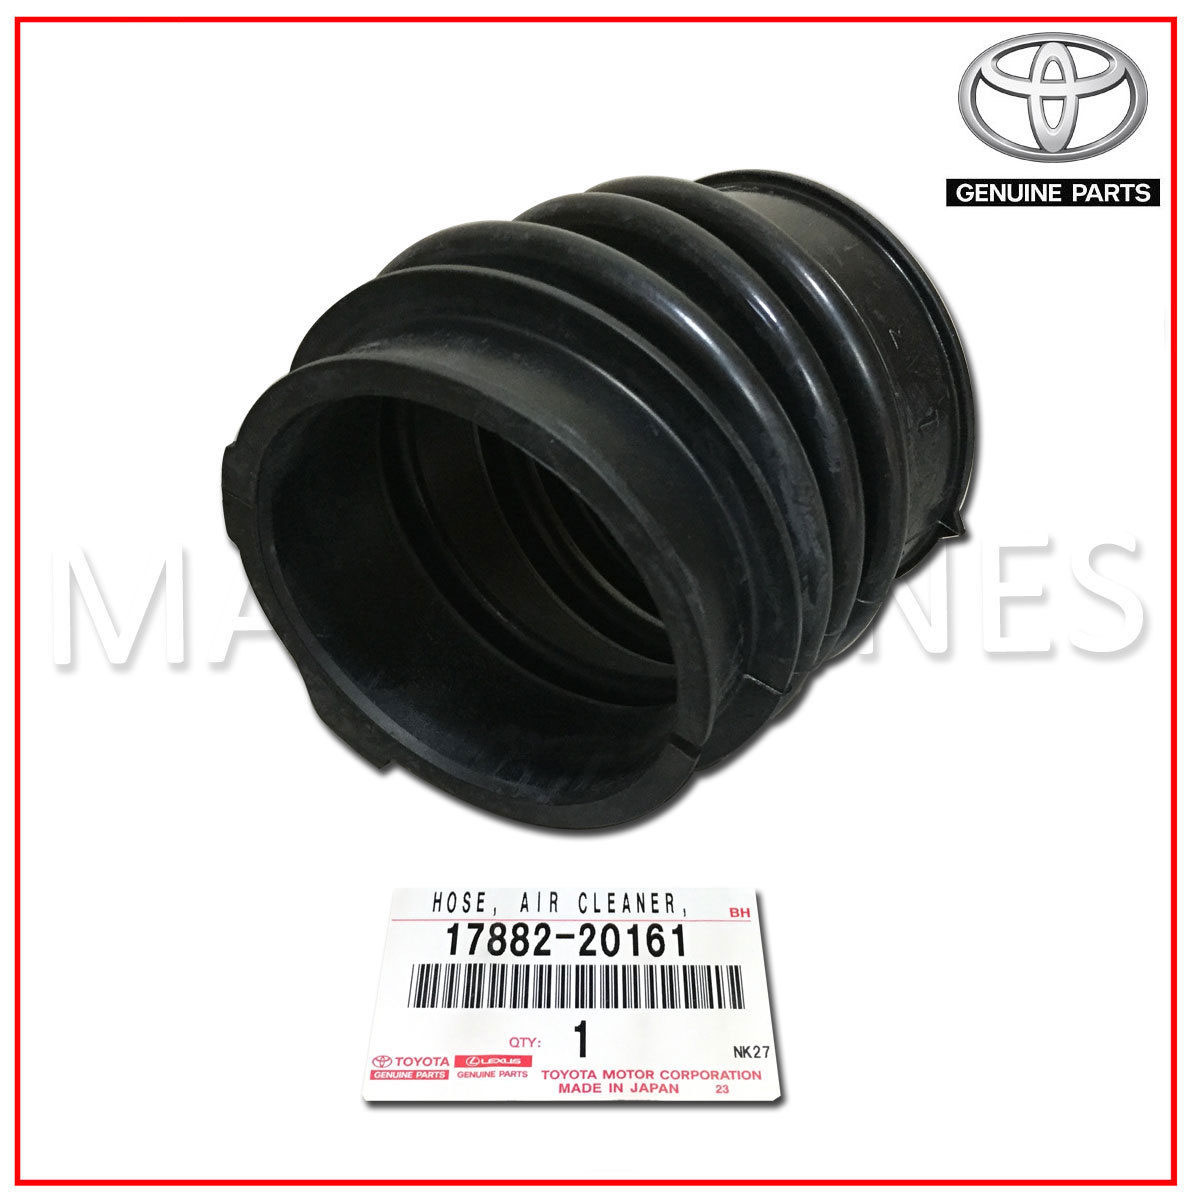 Toyota 17882-74201 Air Cleaner Hose